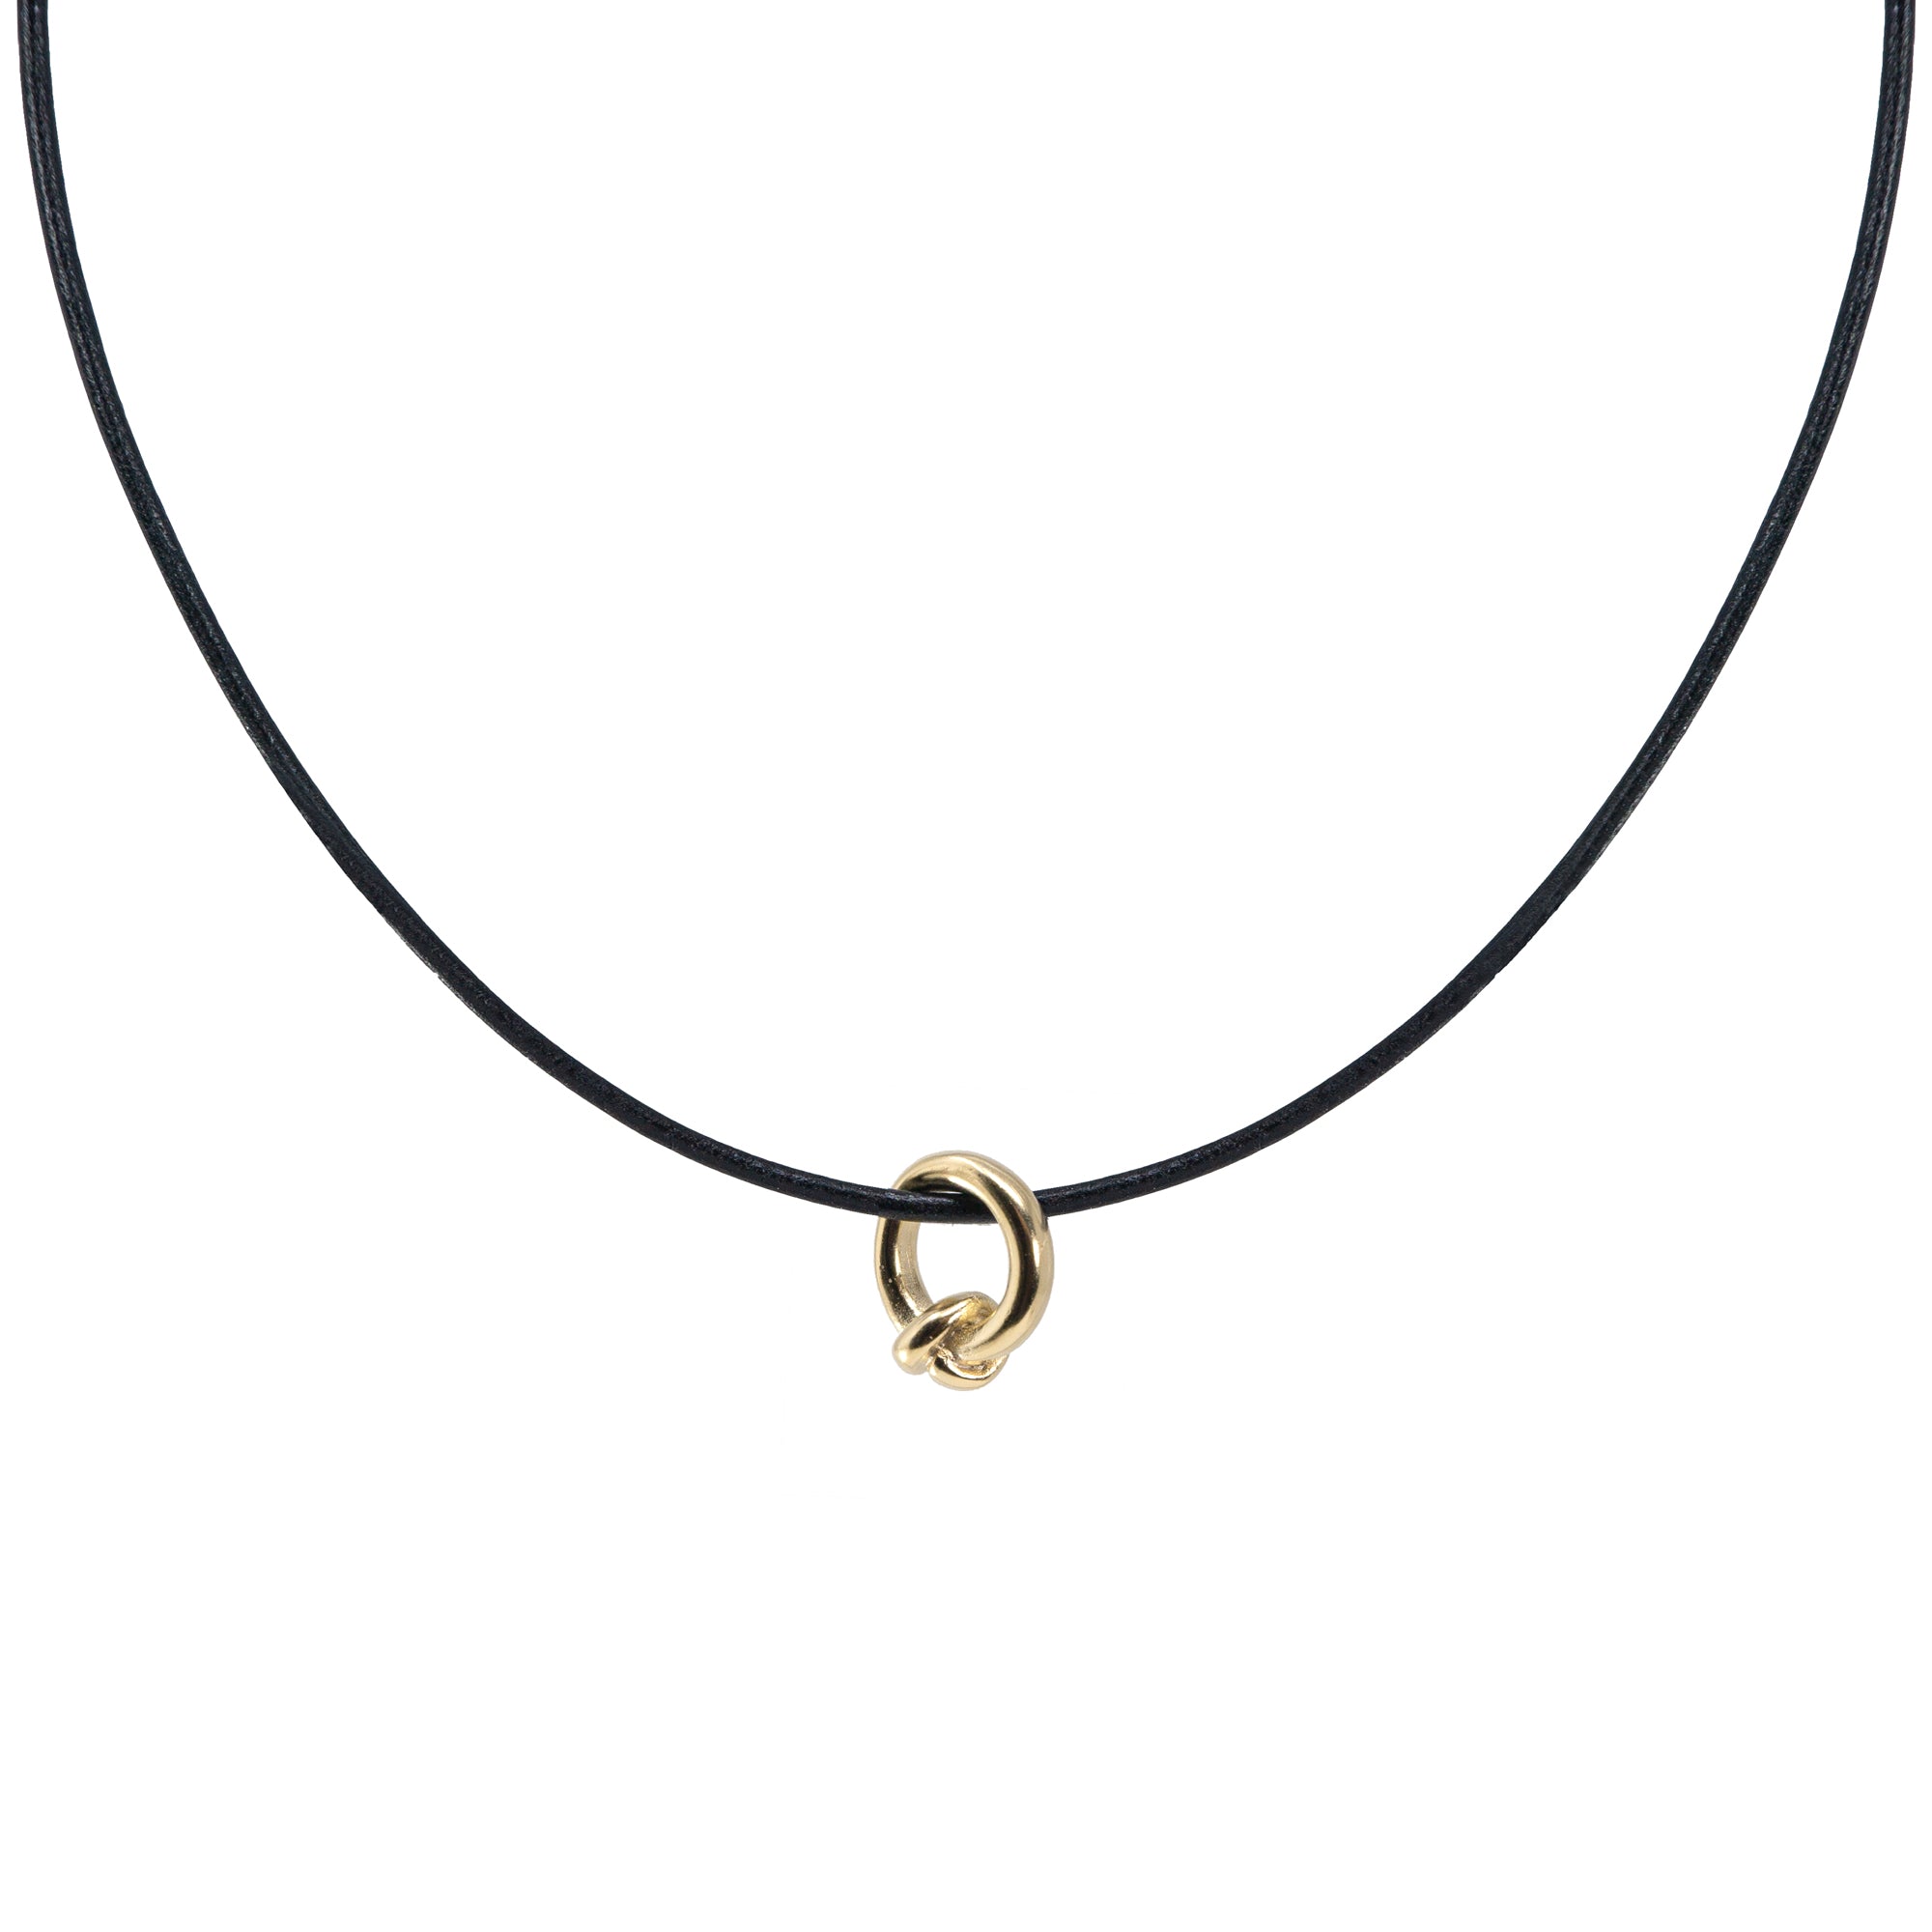 Modern good vibes knot necklace